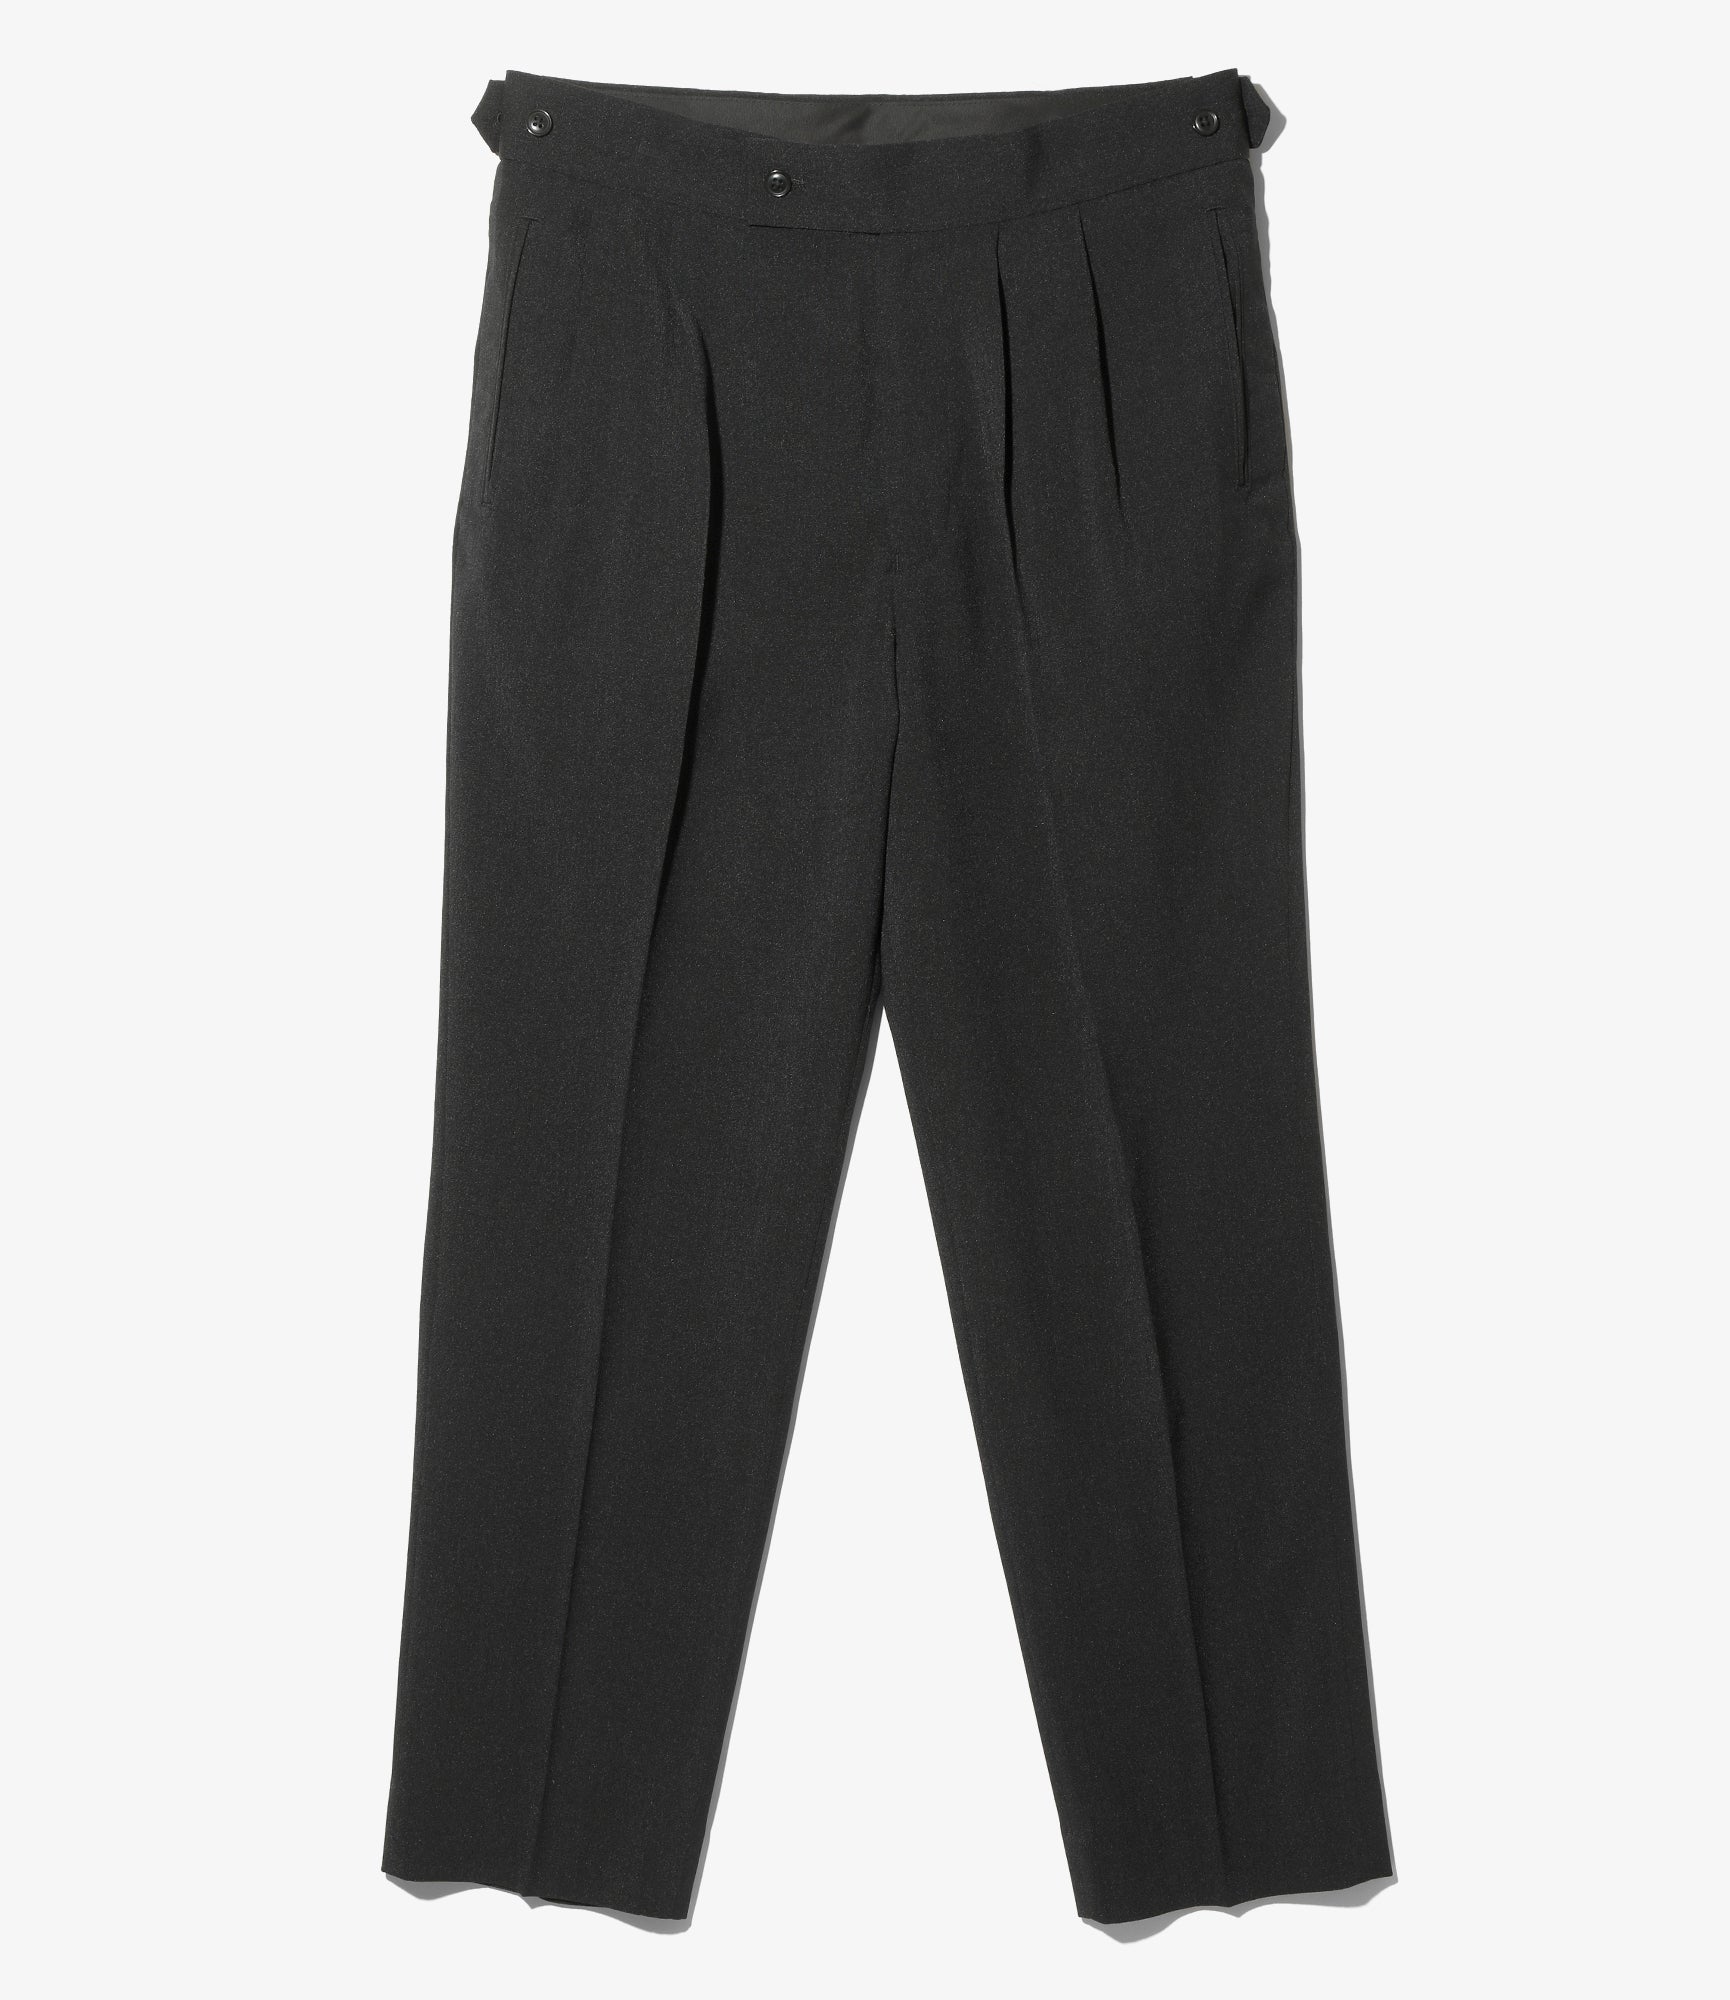 Tucked Side Tab Trouser - Black - Poly Chambray